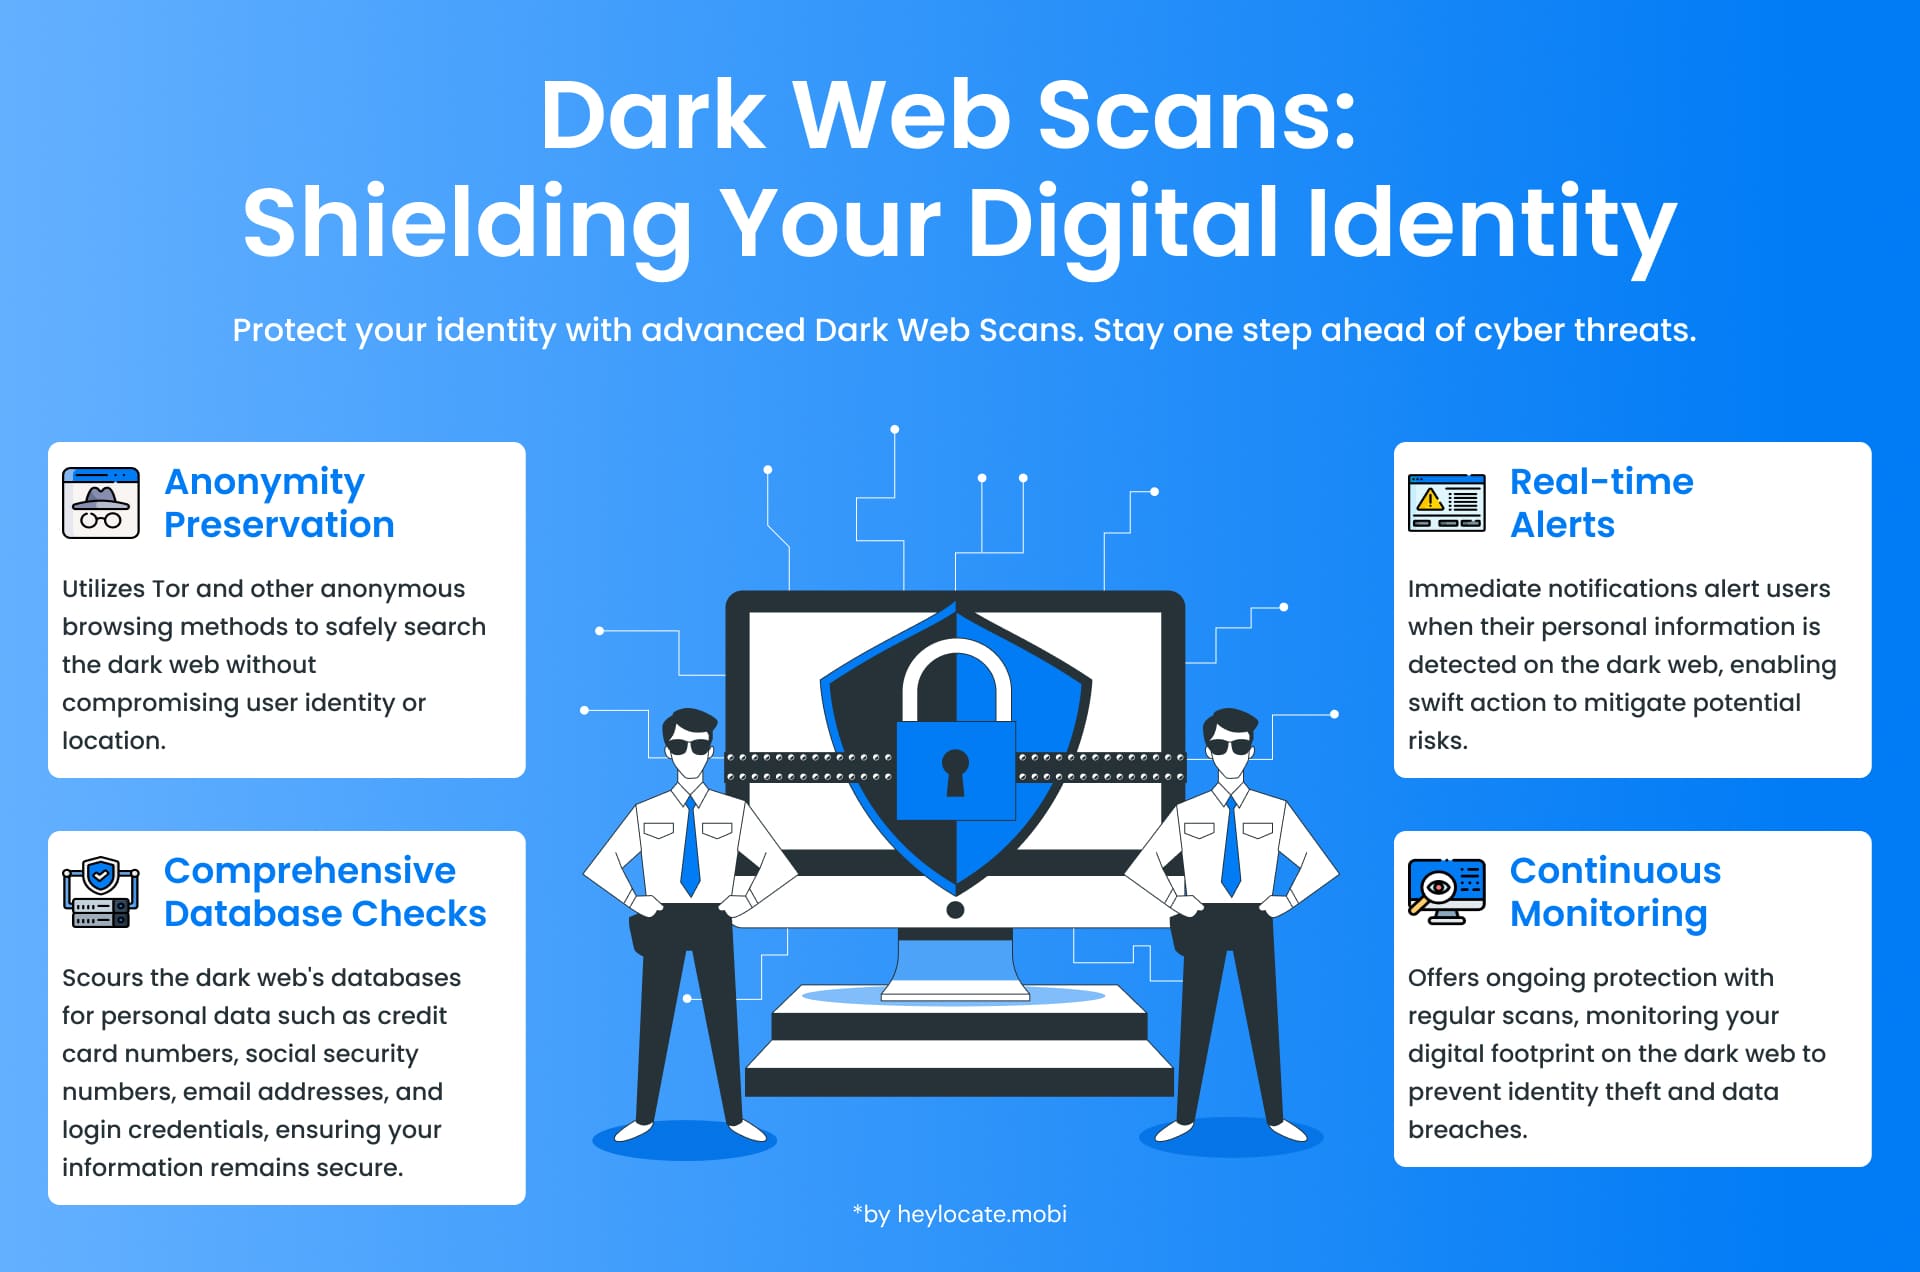 Infographic showing two men and a laptop in the center with information about scanning the dark web to protect digital identity. It presents four key benefits with detailed steps and monitoring strategies